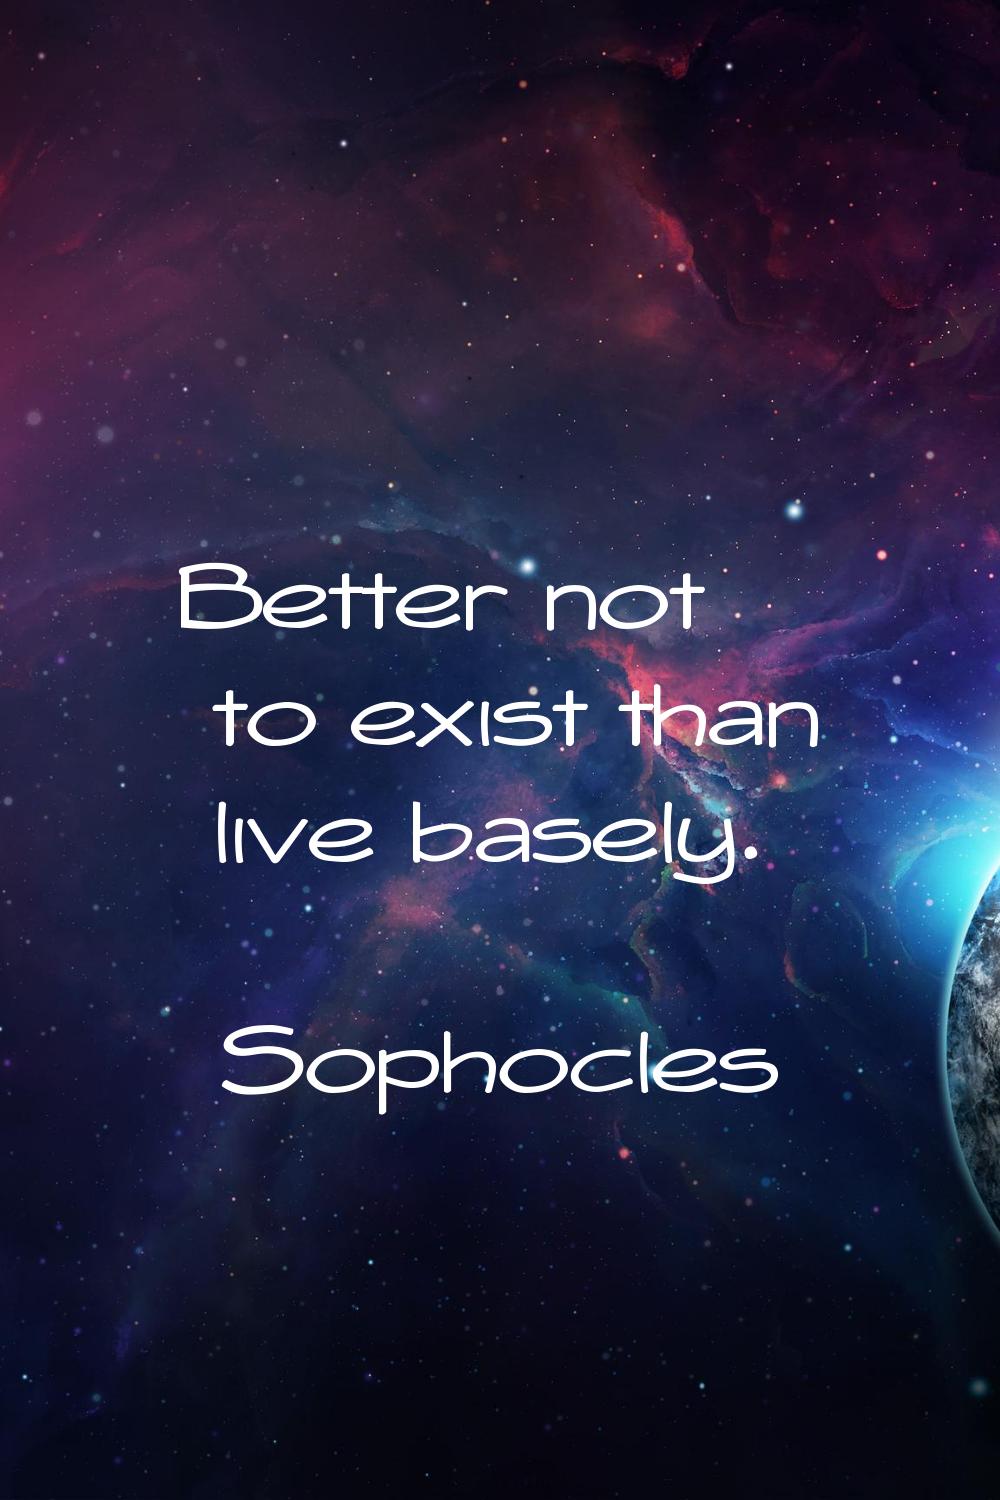 Better not to exist than live basely.